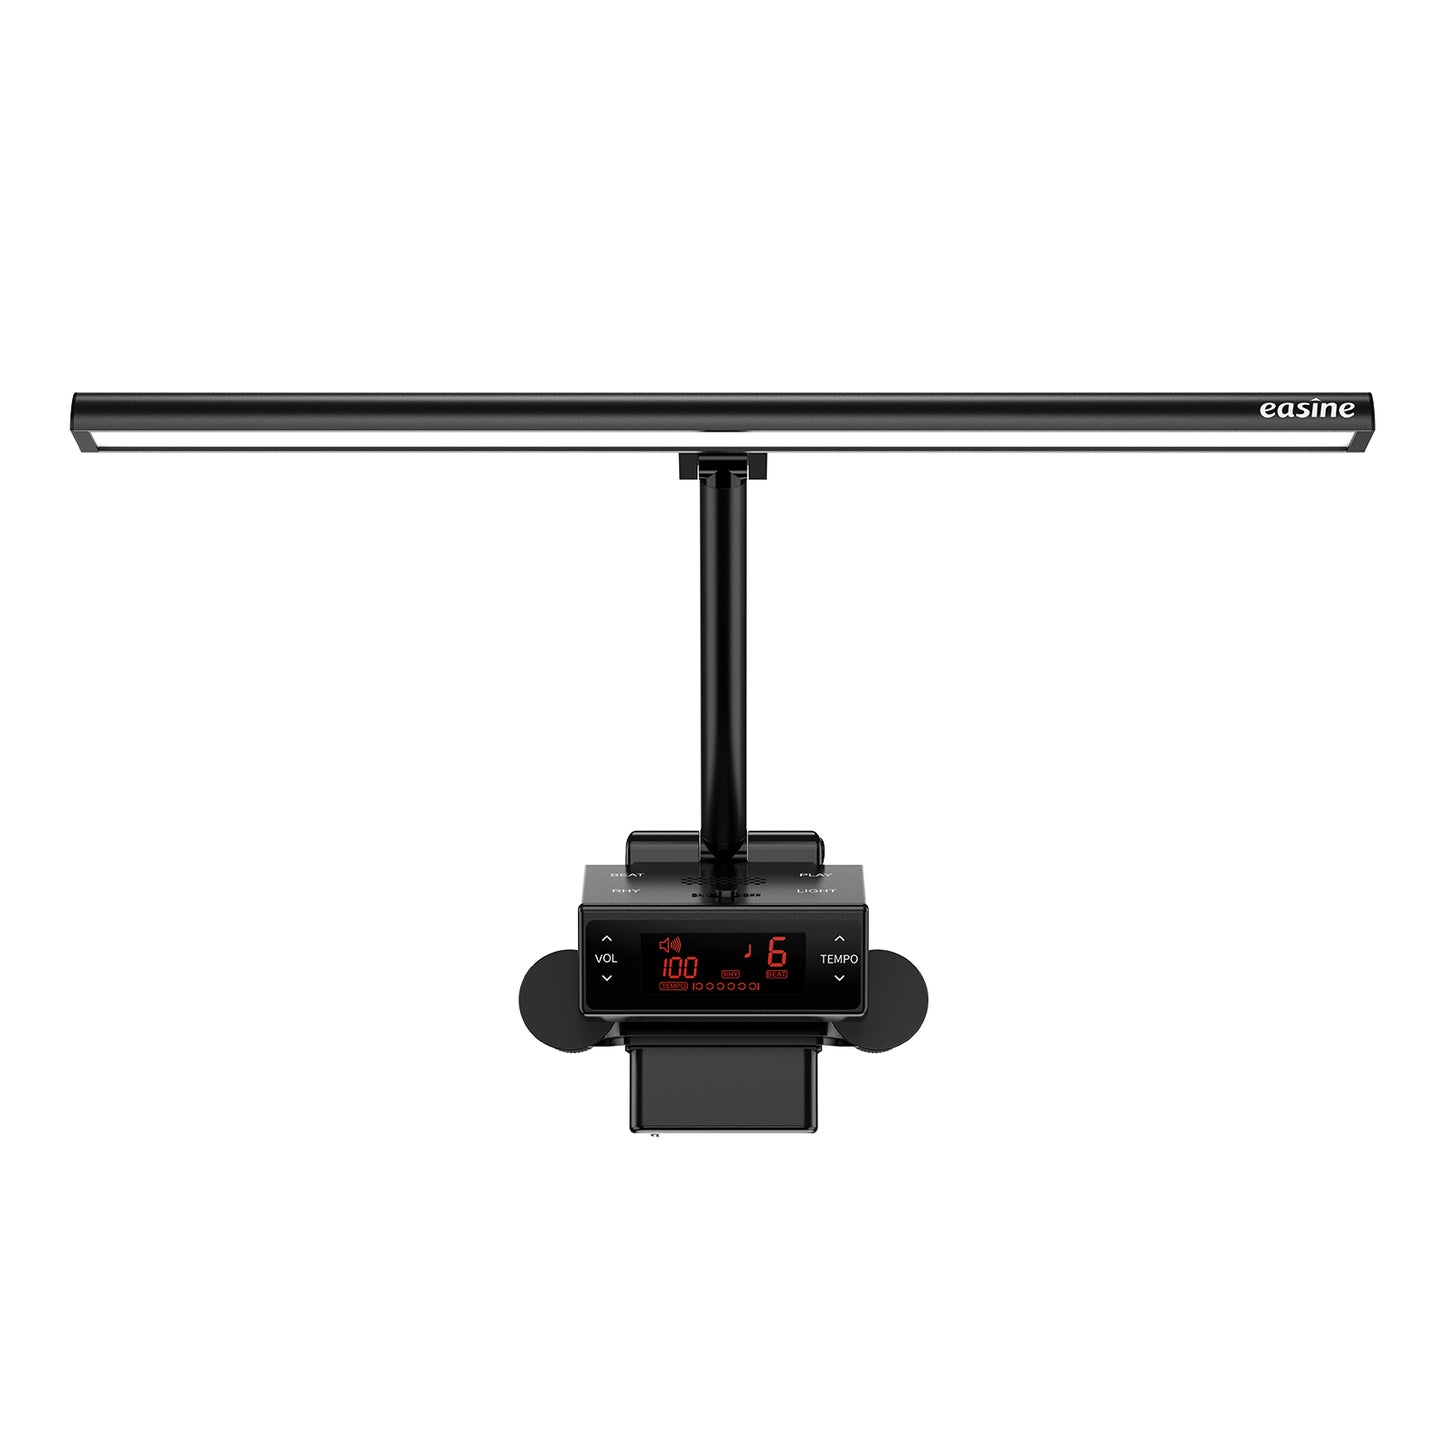 EASINE piano lamp with metronome review - shining the light and bringing  the beats - The Gadgeteer